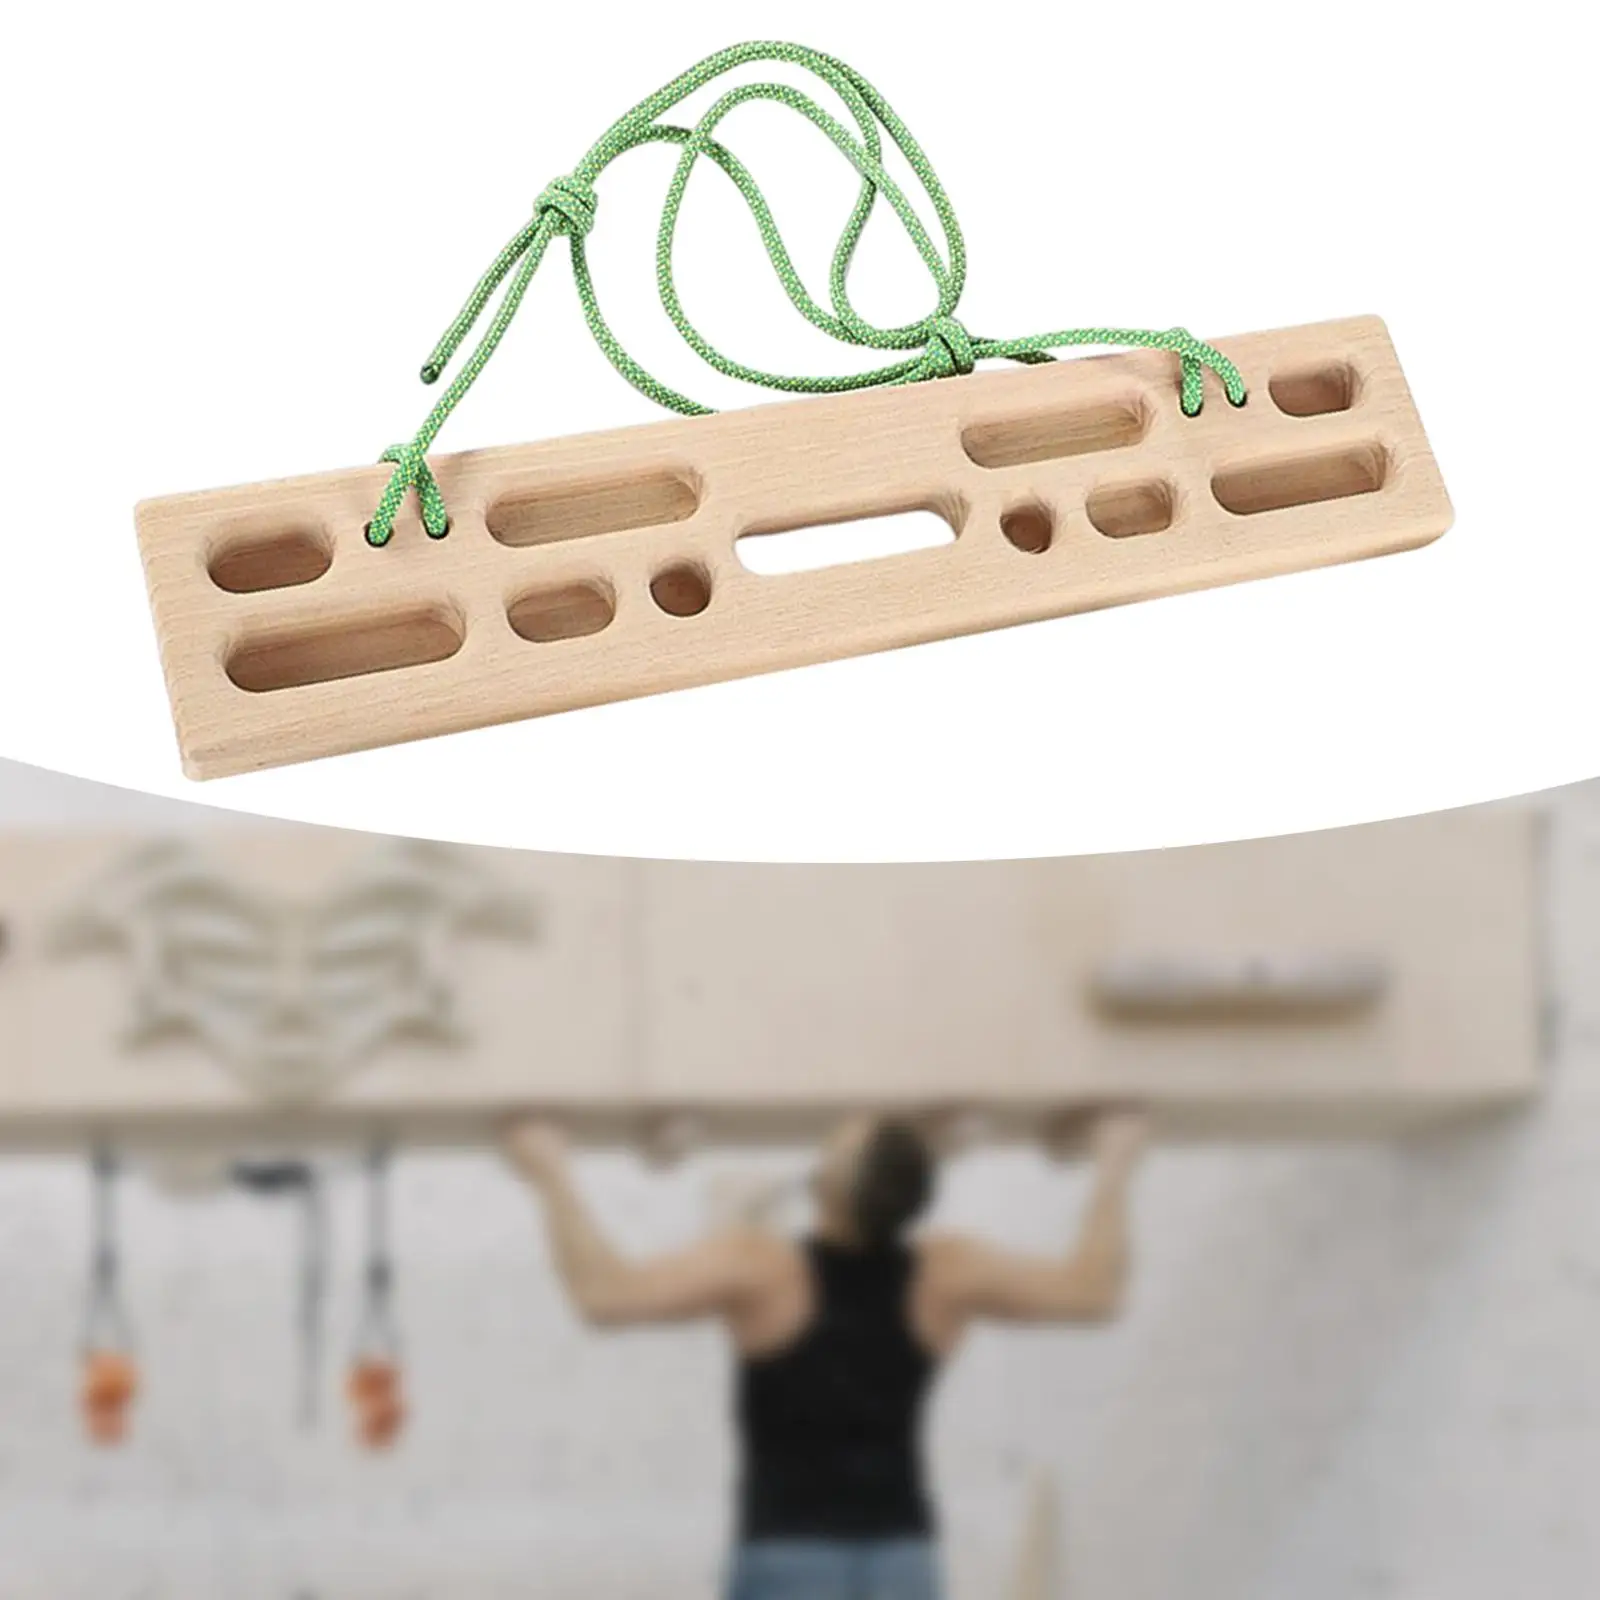 Climbing Hangboard Climbing Fingerboard Training Board Strength Trainer Pull up Board for Wall Bouldering Door Athletes Outdoor